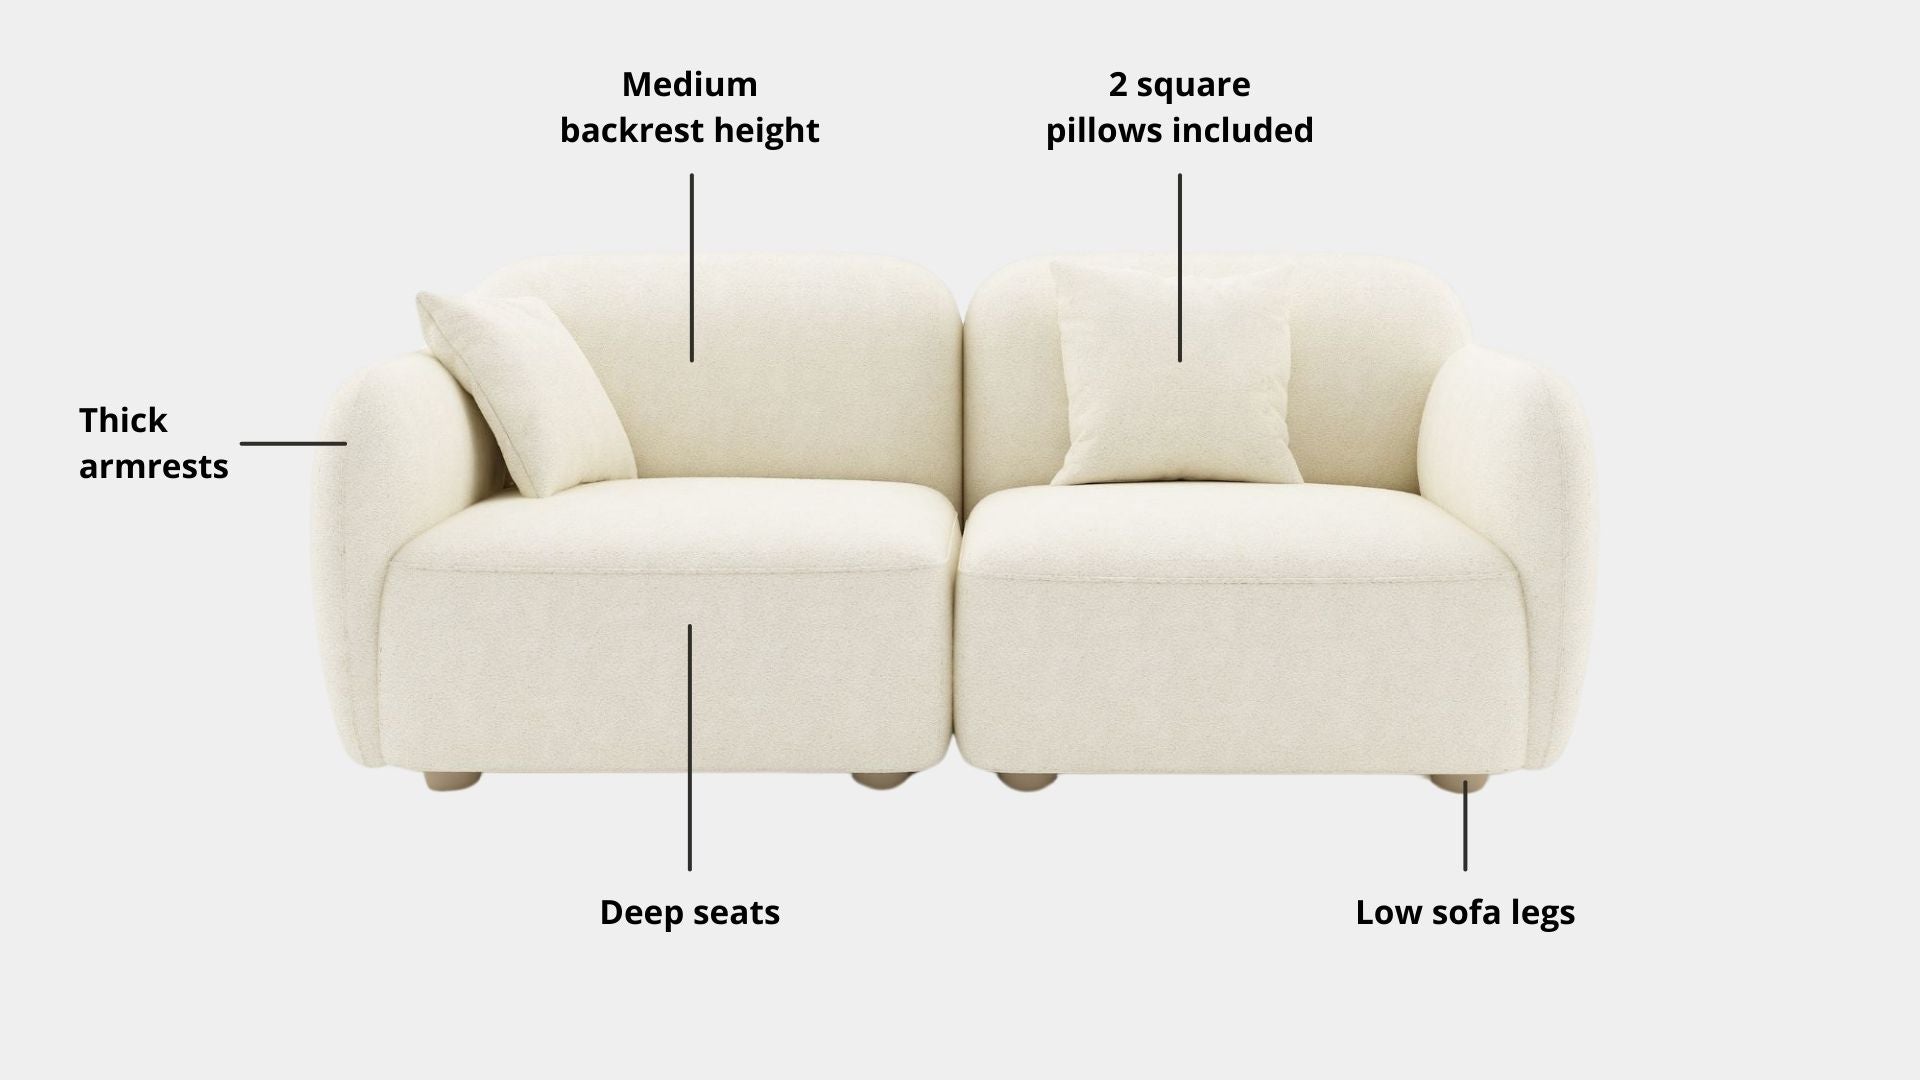 Key features such as armrest thickness, cushion height, seat depth and sofa leg height for Charmy Fabric Sofa